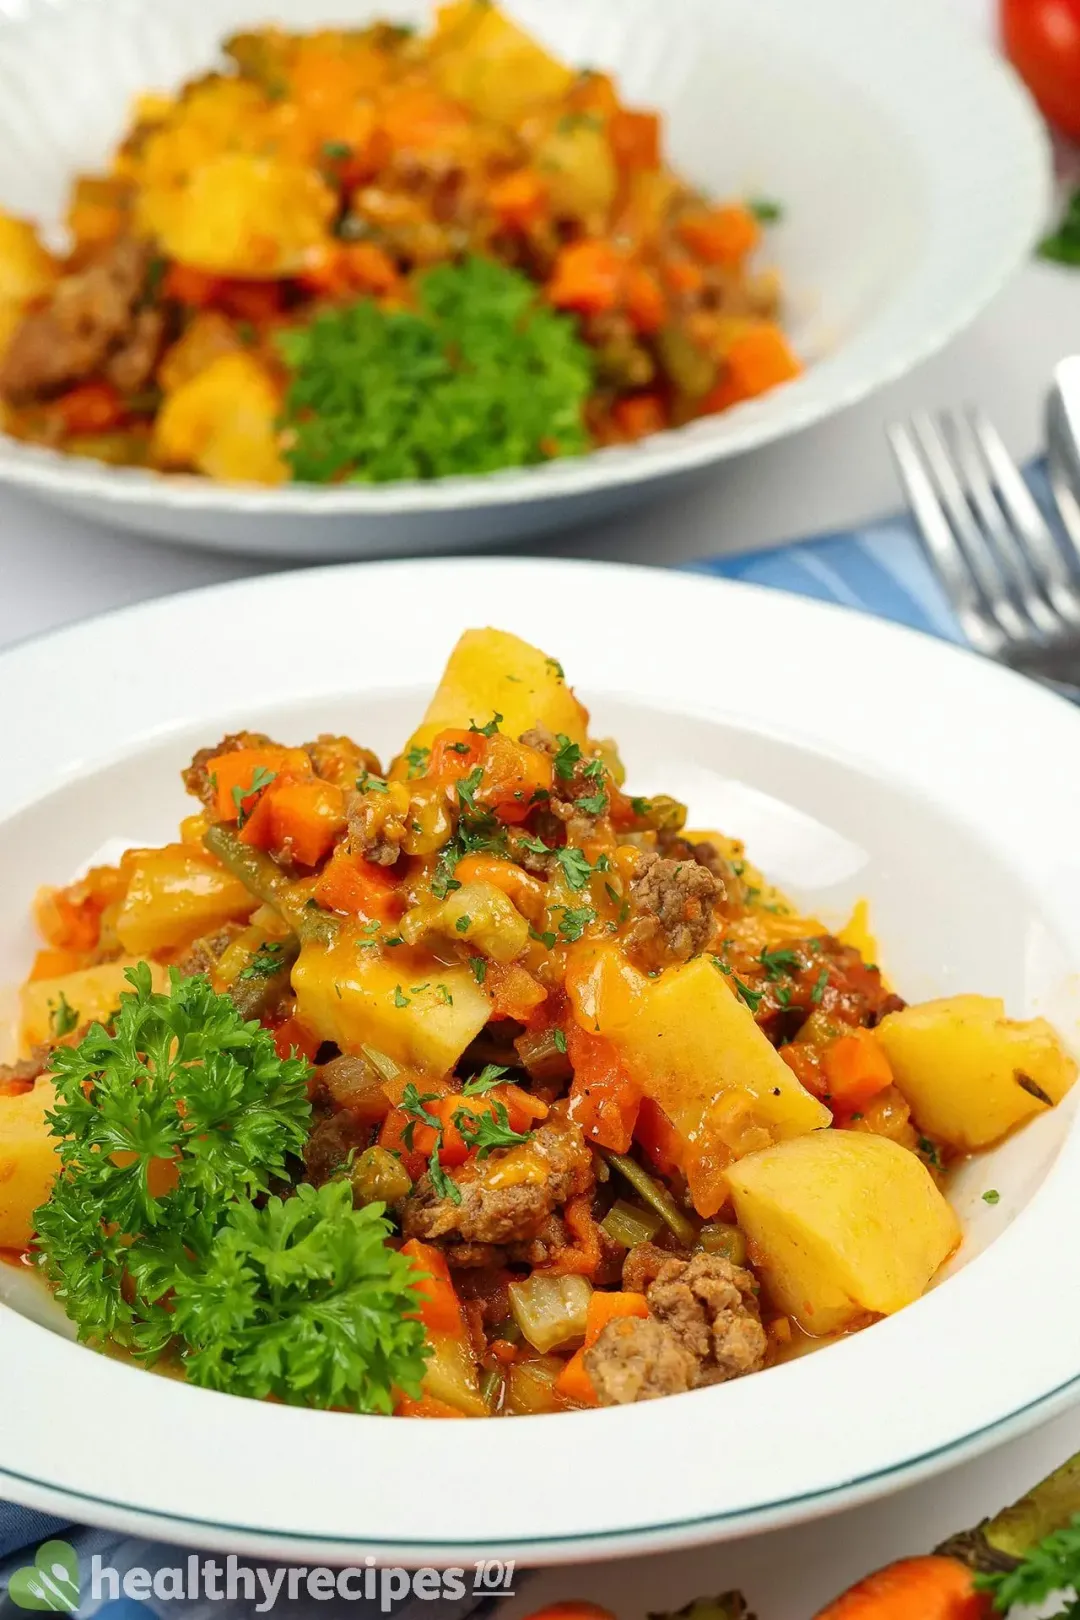 What to Serve With Vegetable Beef Casserole